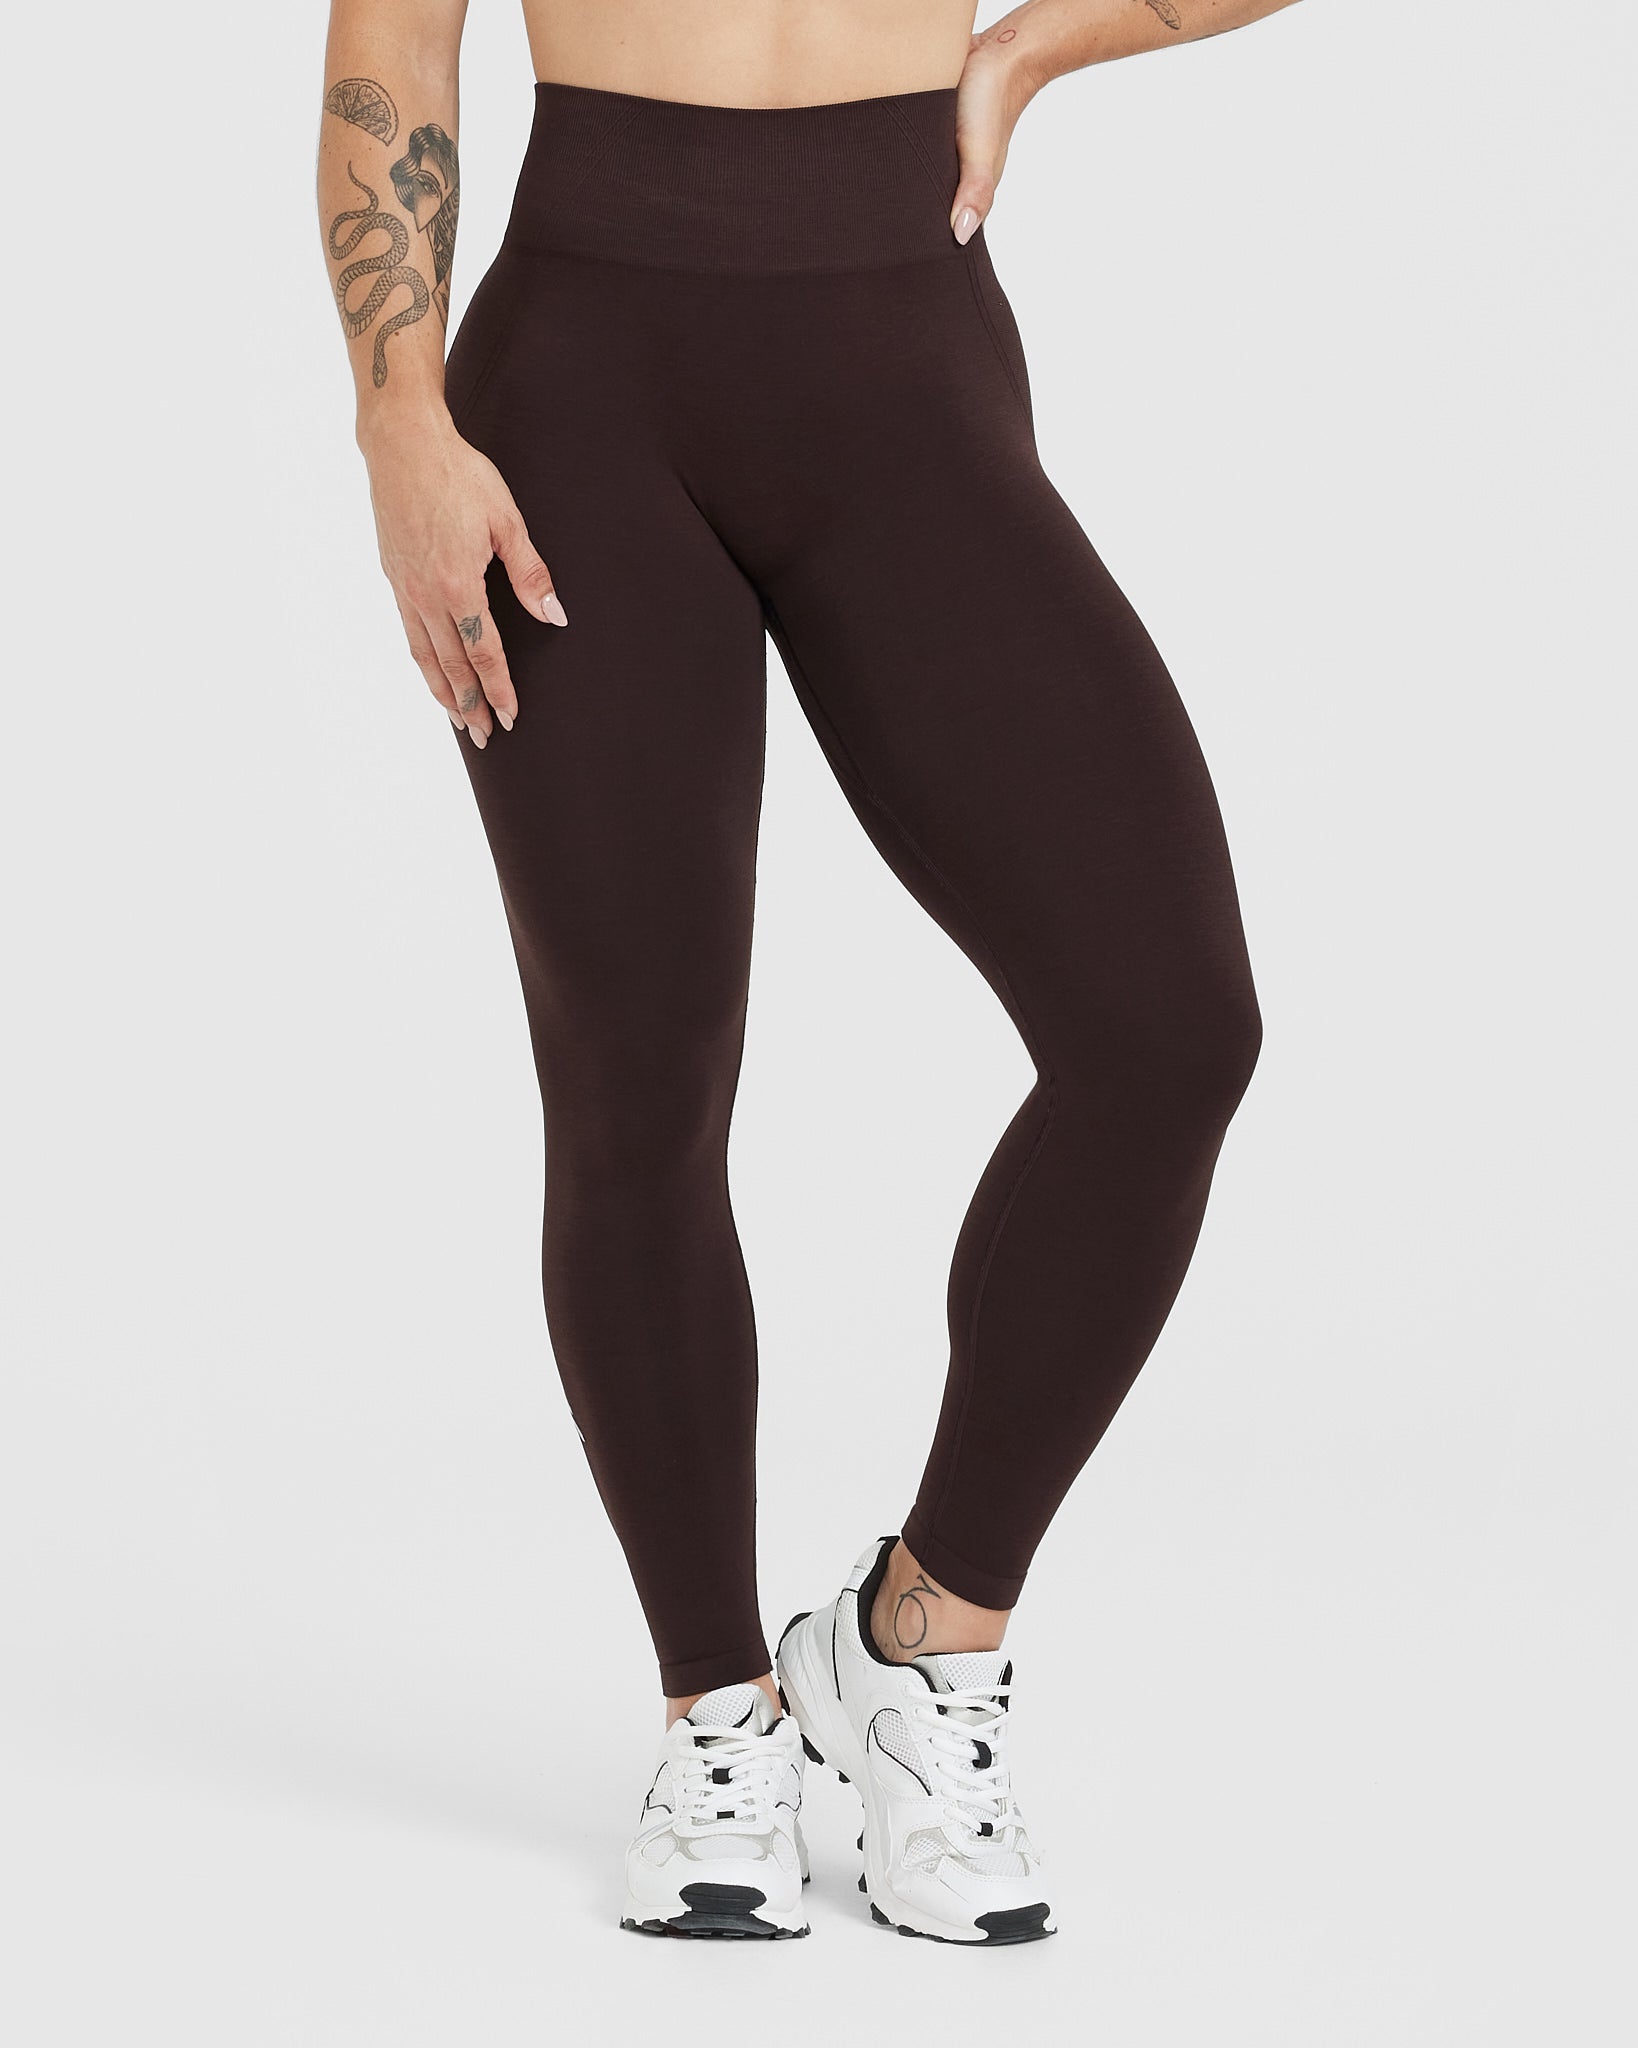 Love & Other things seamless high waisted leggings in chocolate